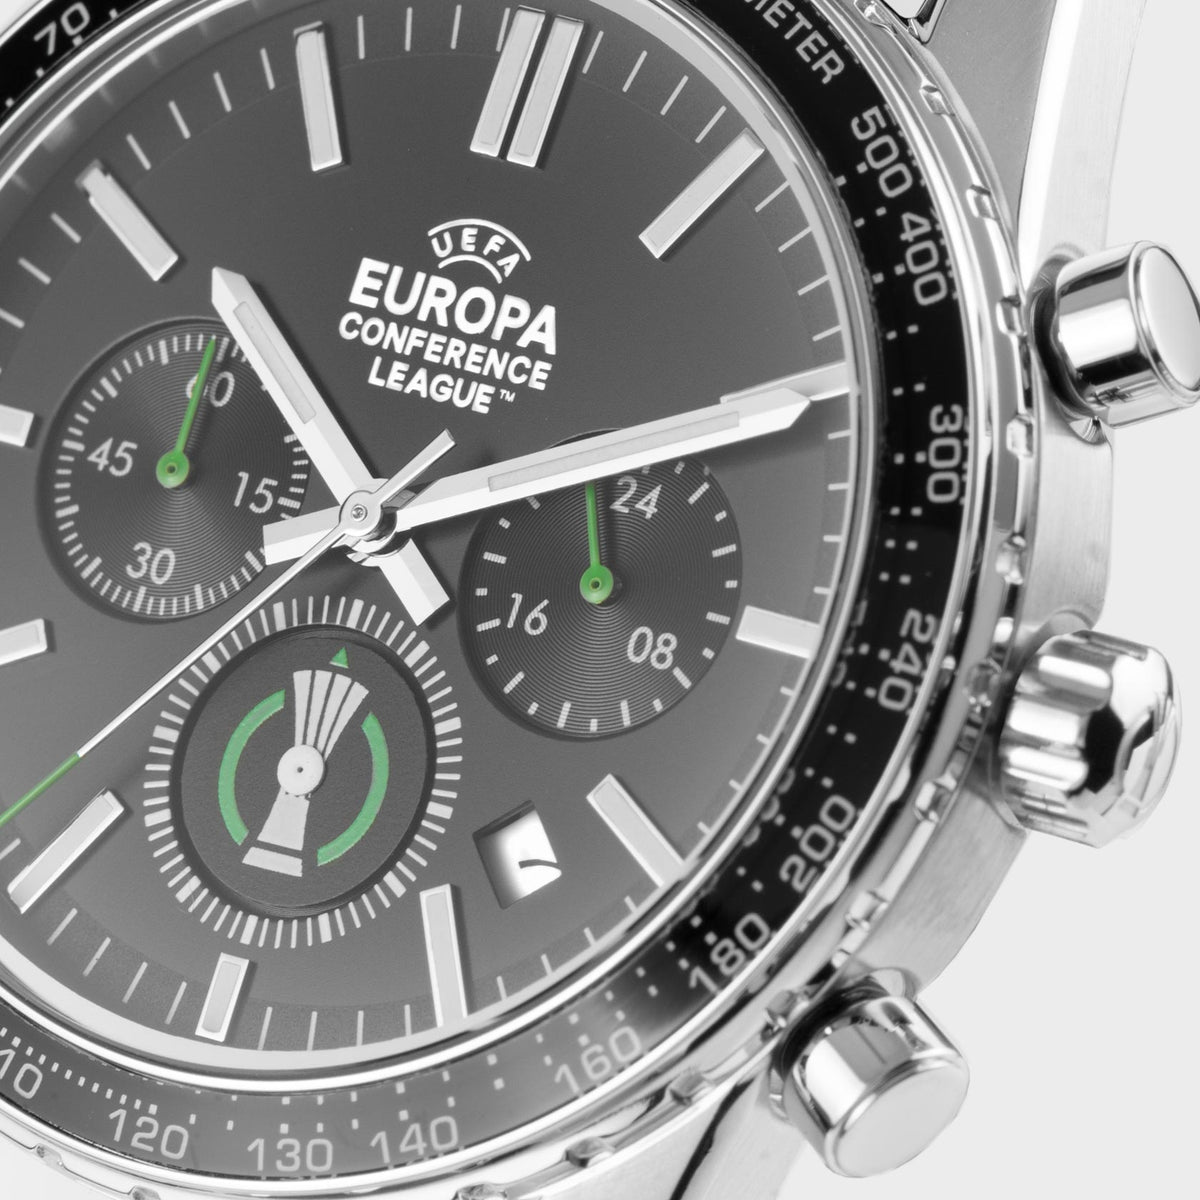 UECL Chronograph ECL-101A Jacques Lemans Watches UEFA Club Competitions Online Store